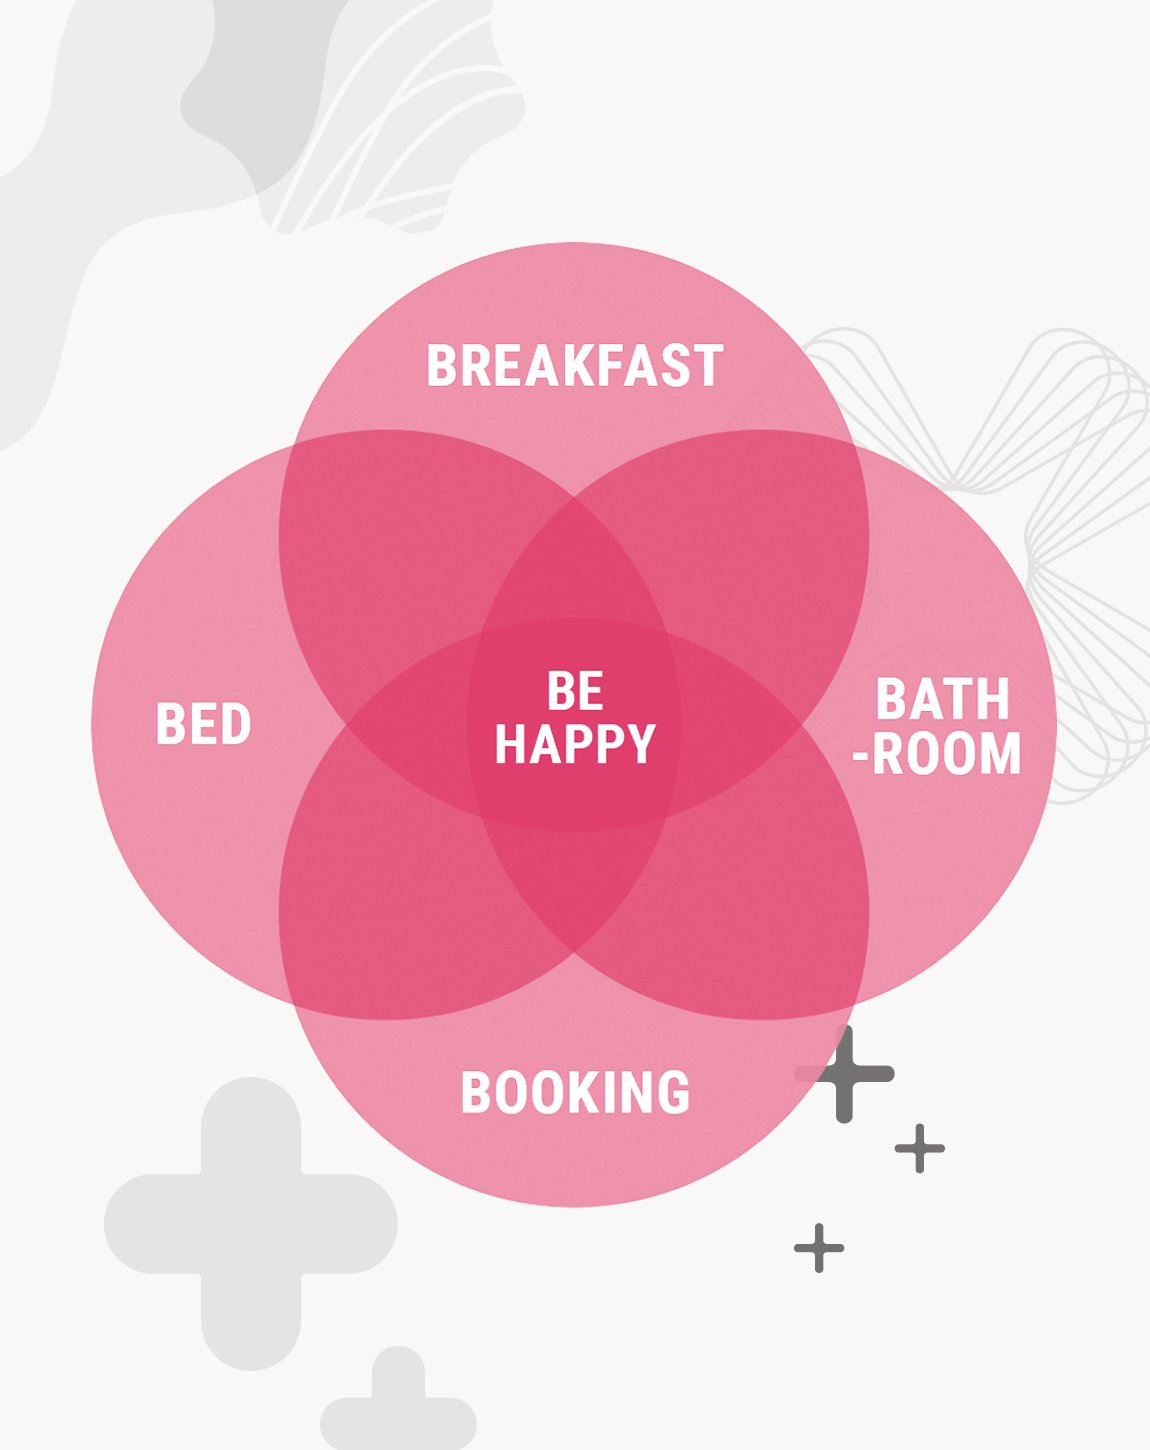 The 5-B strategy of the prizeotel brand is presented in an illustrative diagram